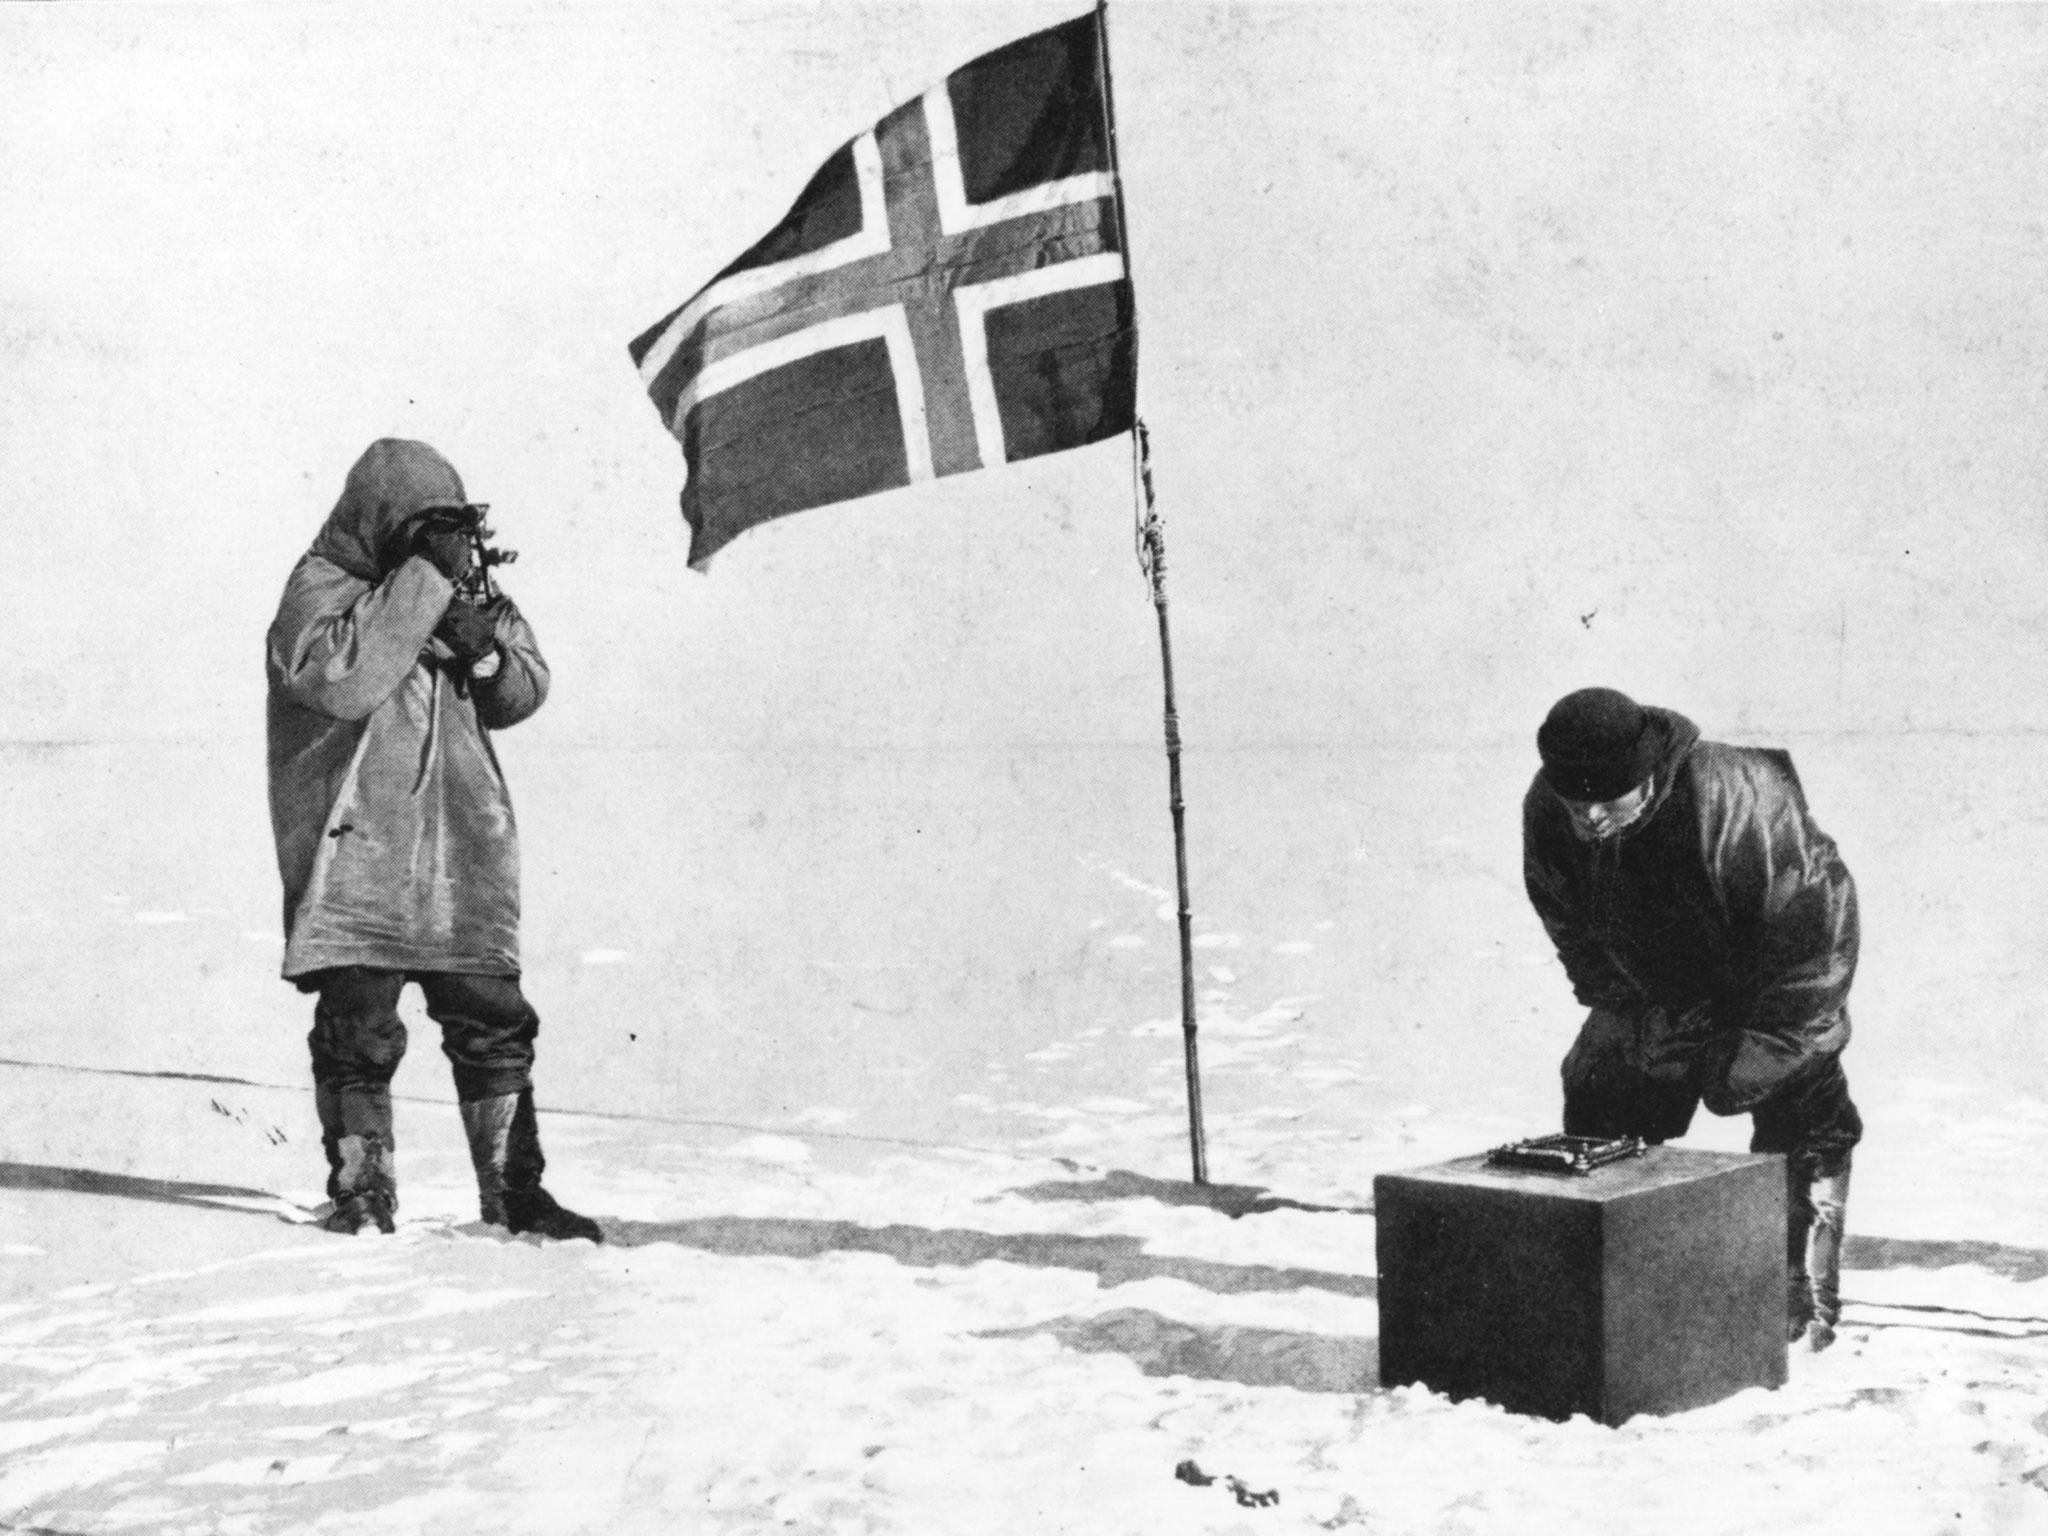 Roald Amundsen taking in the sights at the South Pole, beside the Norwegian flag